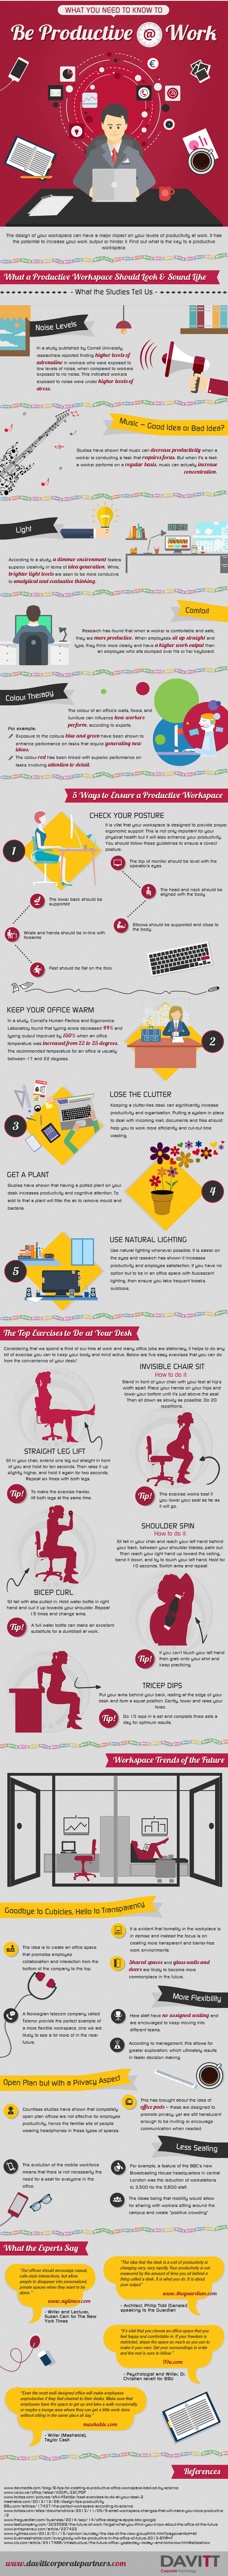 Infographic - What You Need to Know to Be Productive at Work